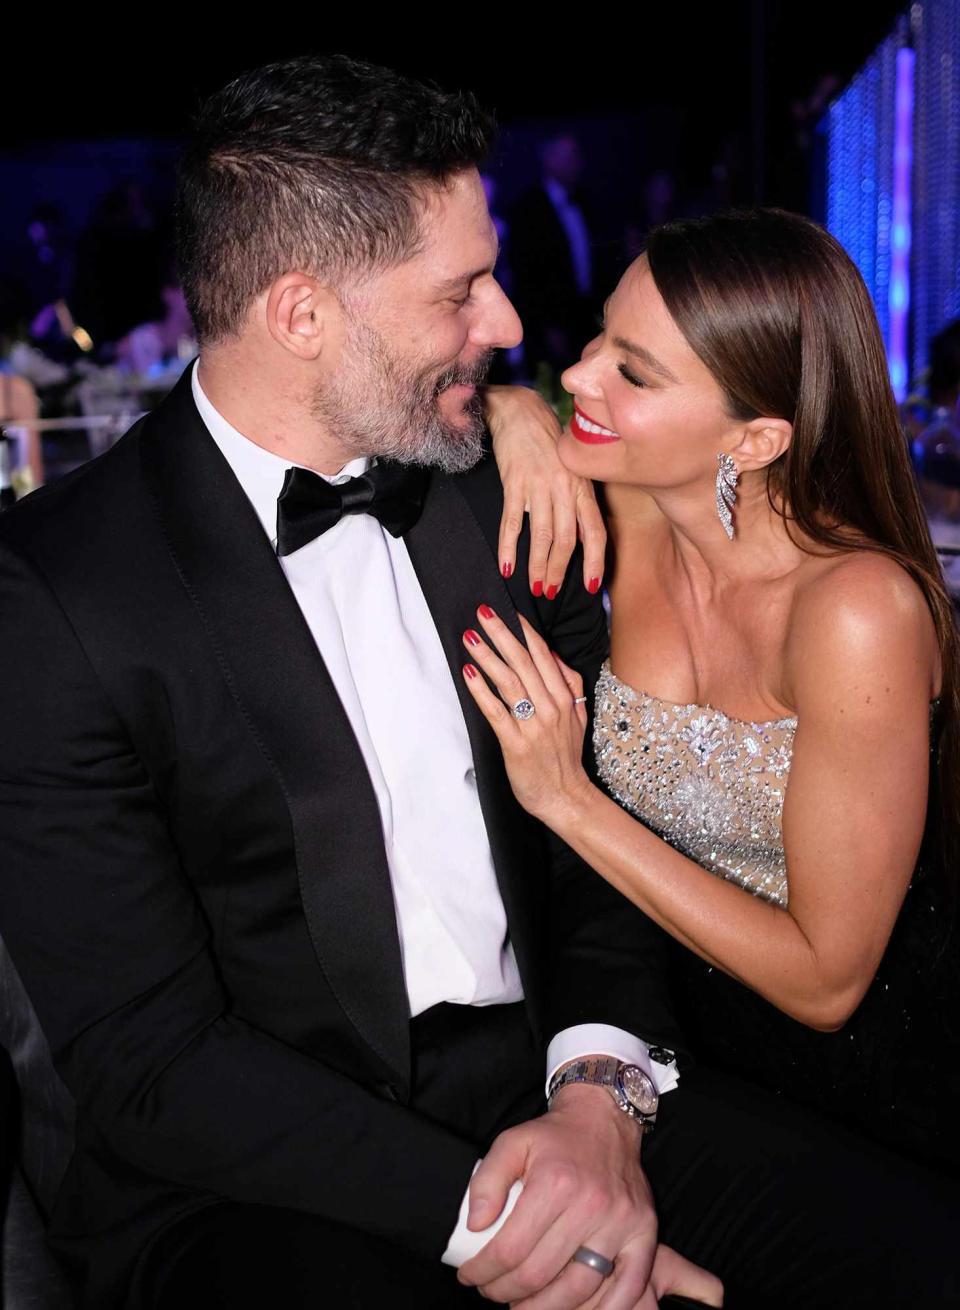 Joe Manganiello and Sofia Vergara attend The 23rd Annual Screen Actors Guild Awards at The Shrine Auditorium on January 29, 2017 in Los Angeles, California. 26592_009